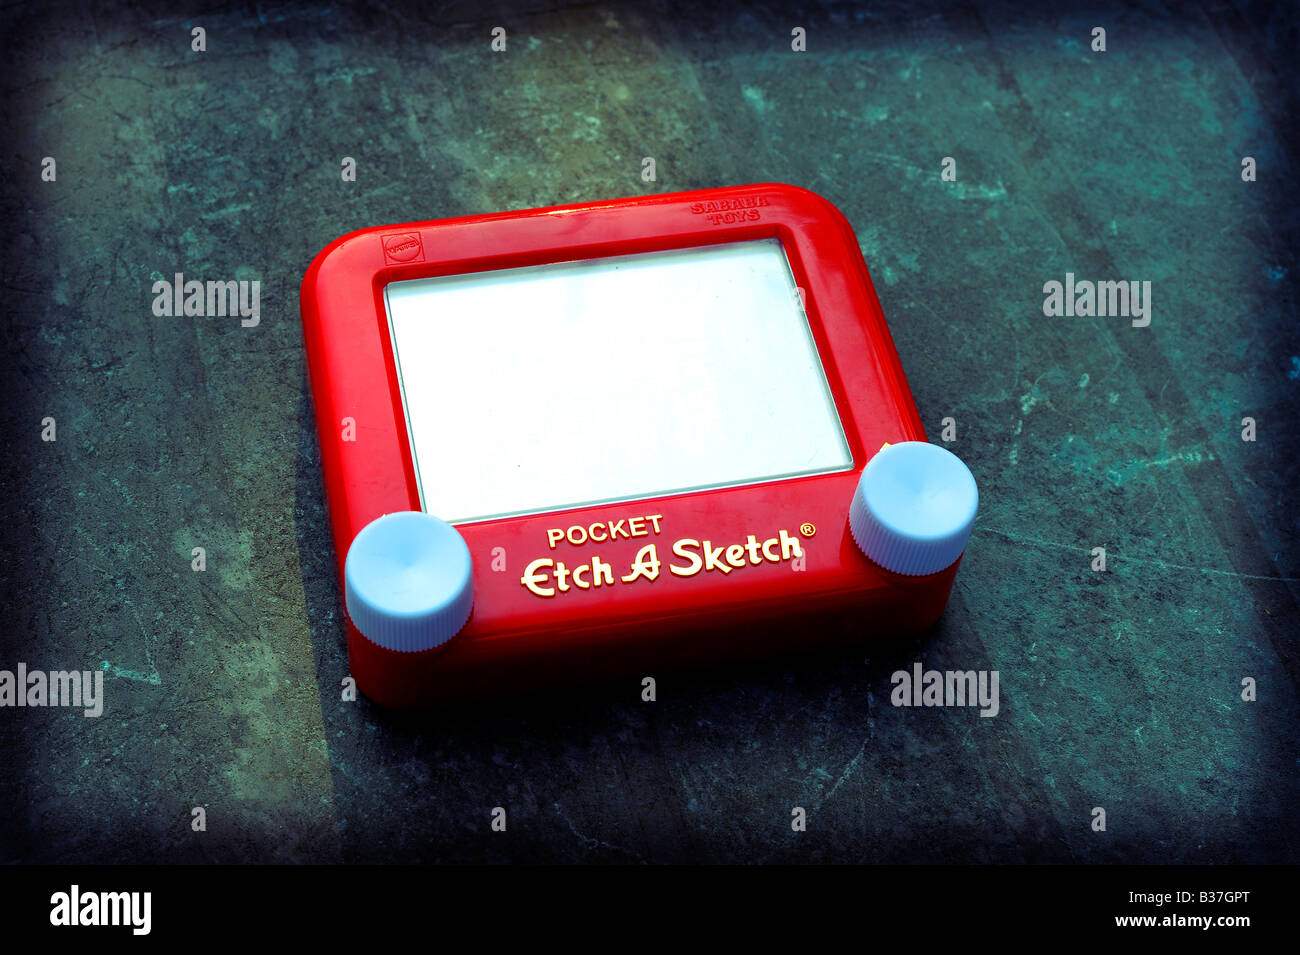 etch a sketch retro toy red seventies vinatge copy lomo editorial art game old fashioned effect Stock Photo